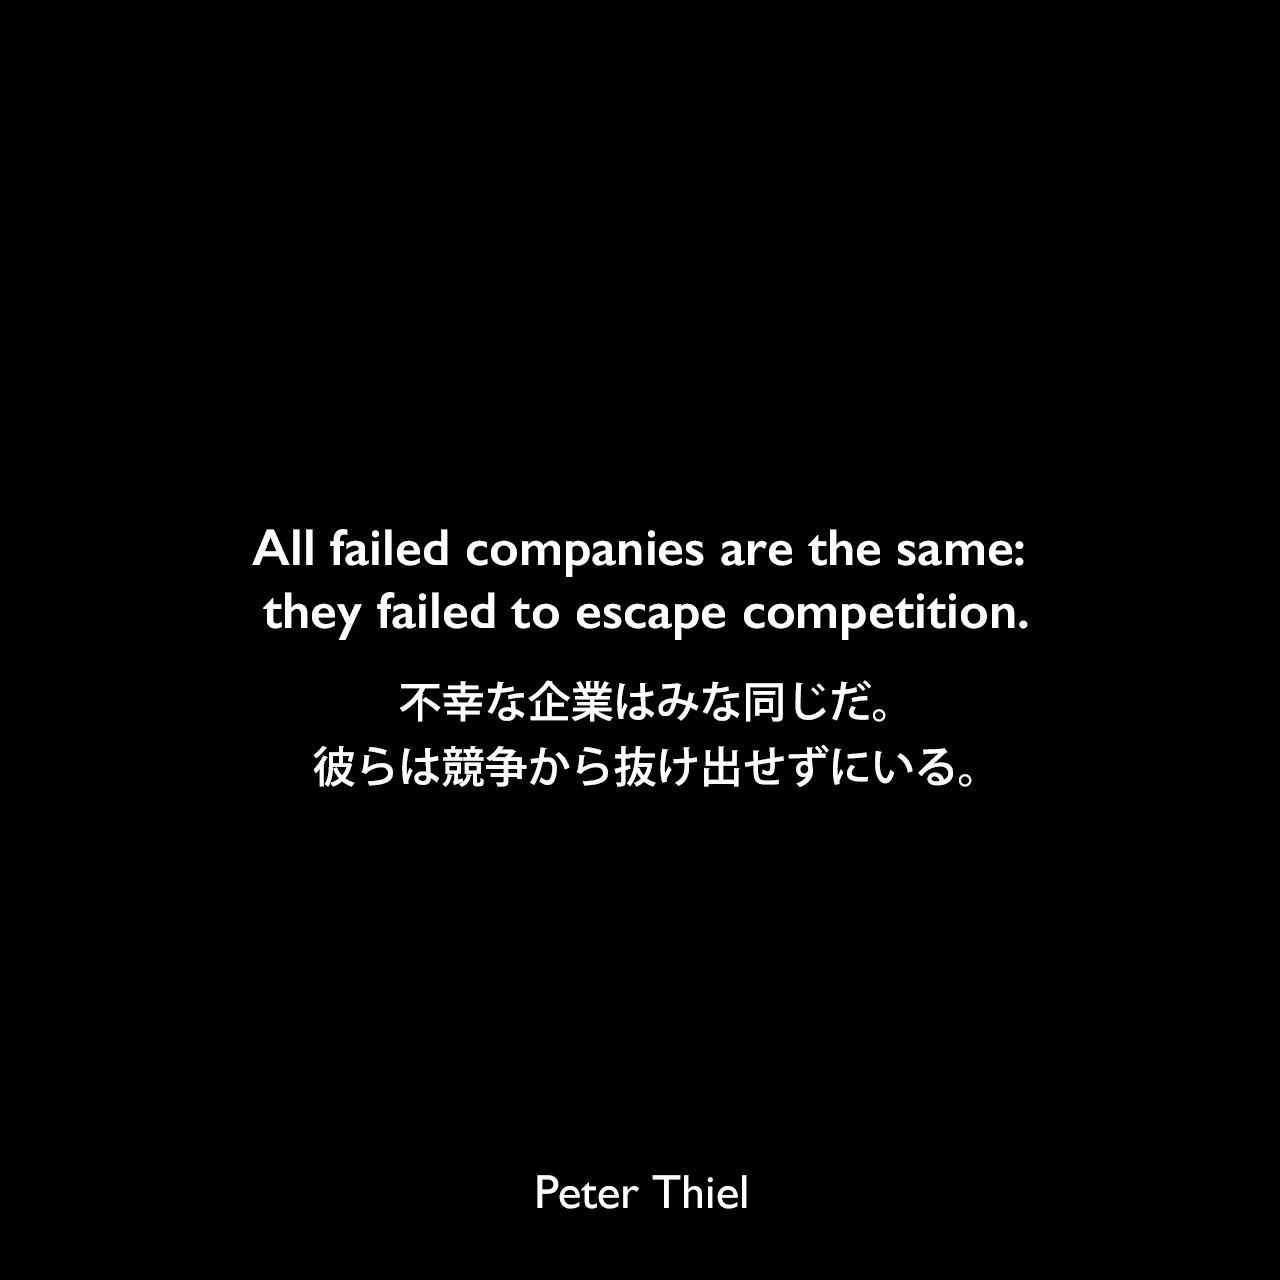 All failed companies are the same: they failed to escape competition.不幸な企業はみな同じだ。彼らは競争から抜け出せずにいる。- ピーター・ティールの本「Zero to One」よりPeter Thiel